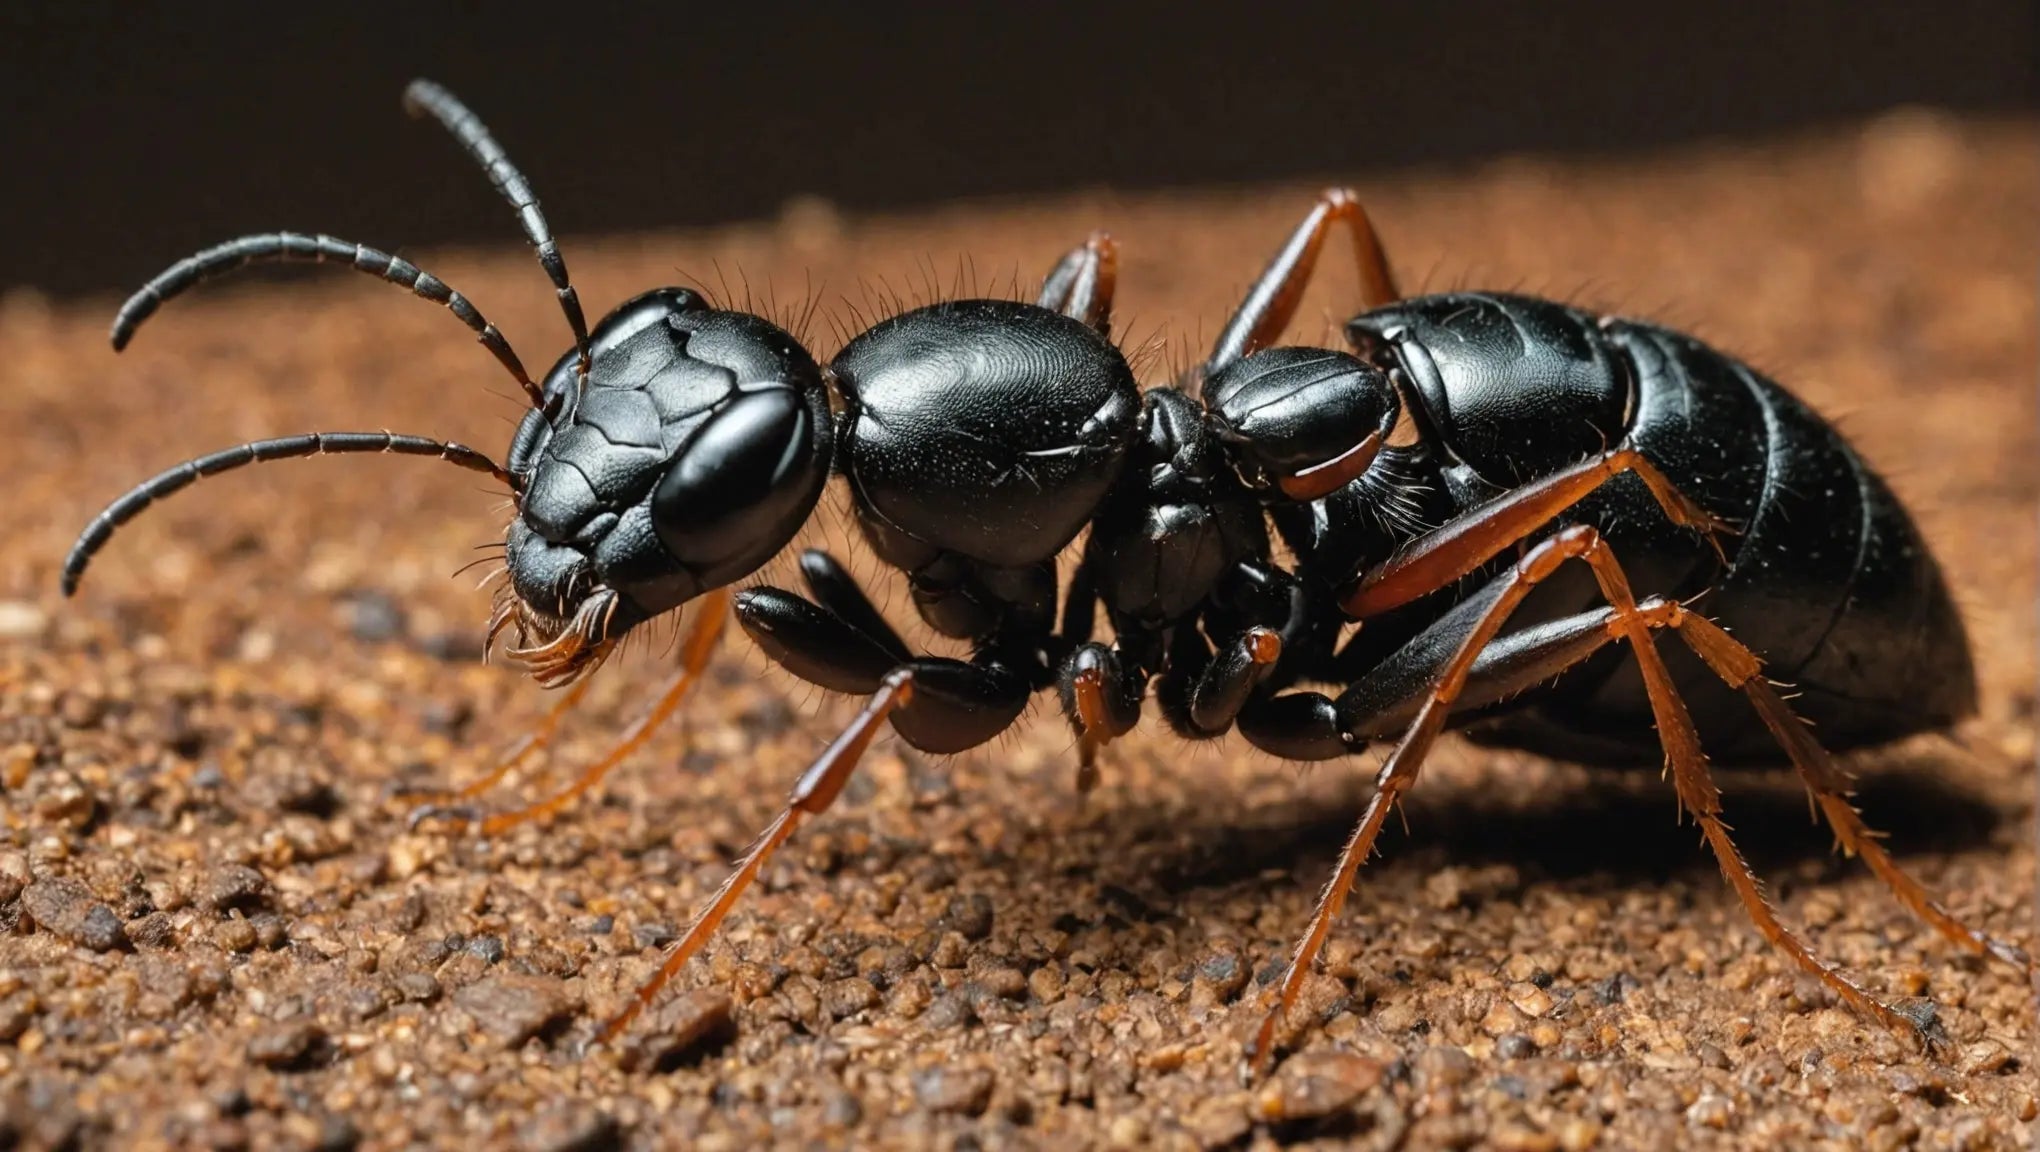 Get Started with Antkeeping: Essential Starter Kits for Ant Enthusiasts